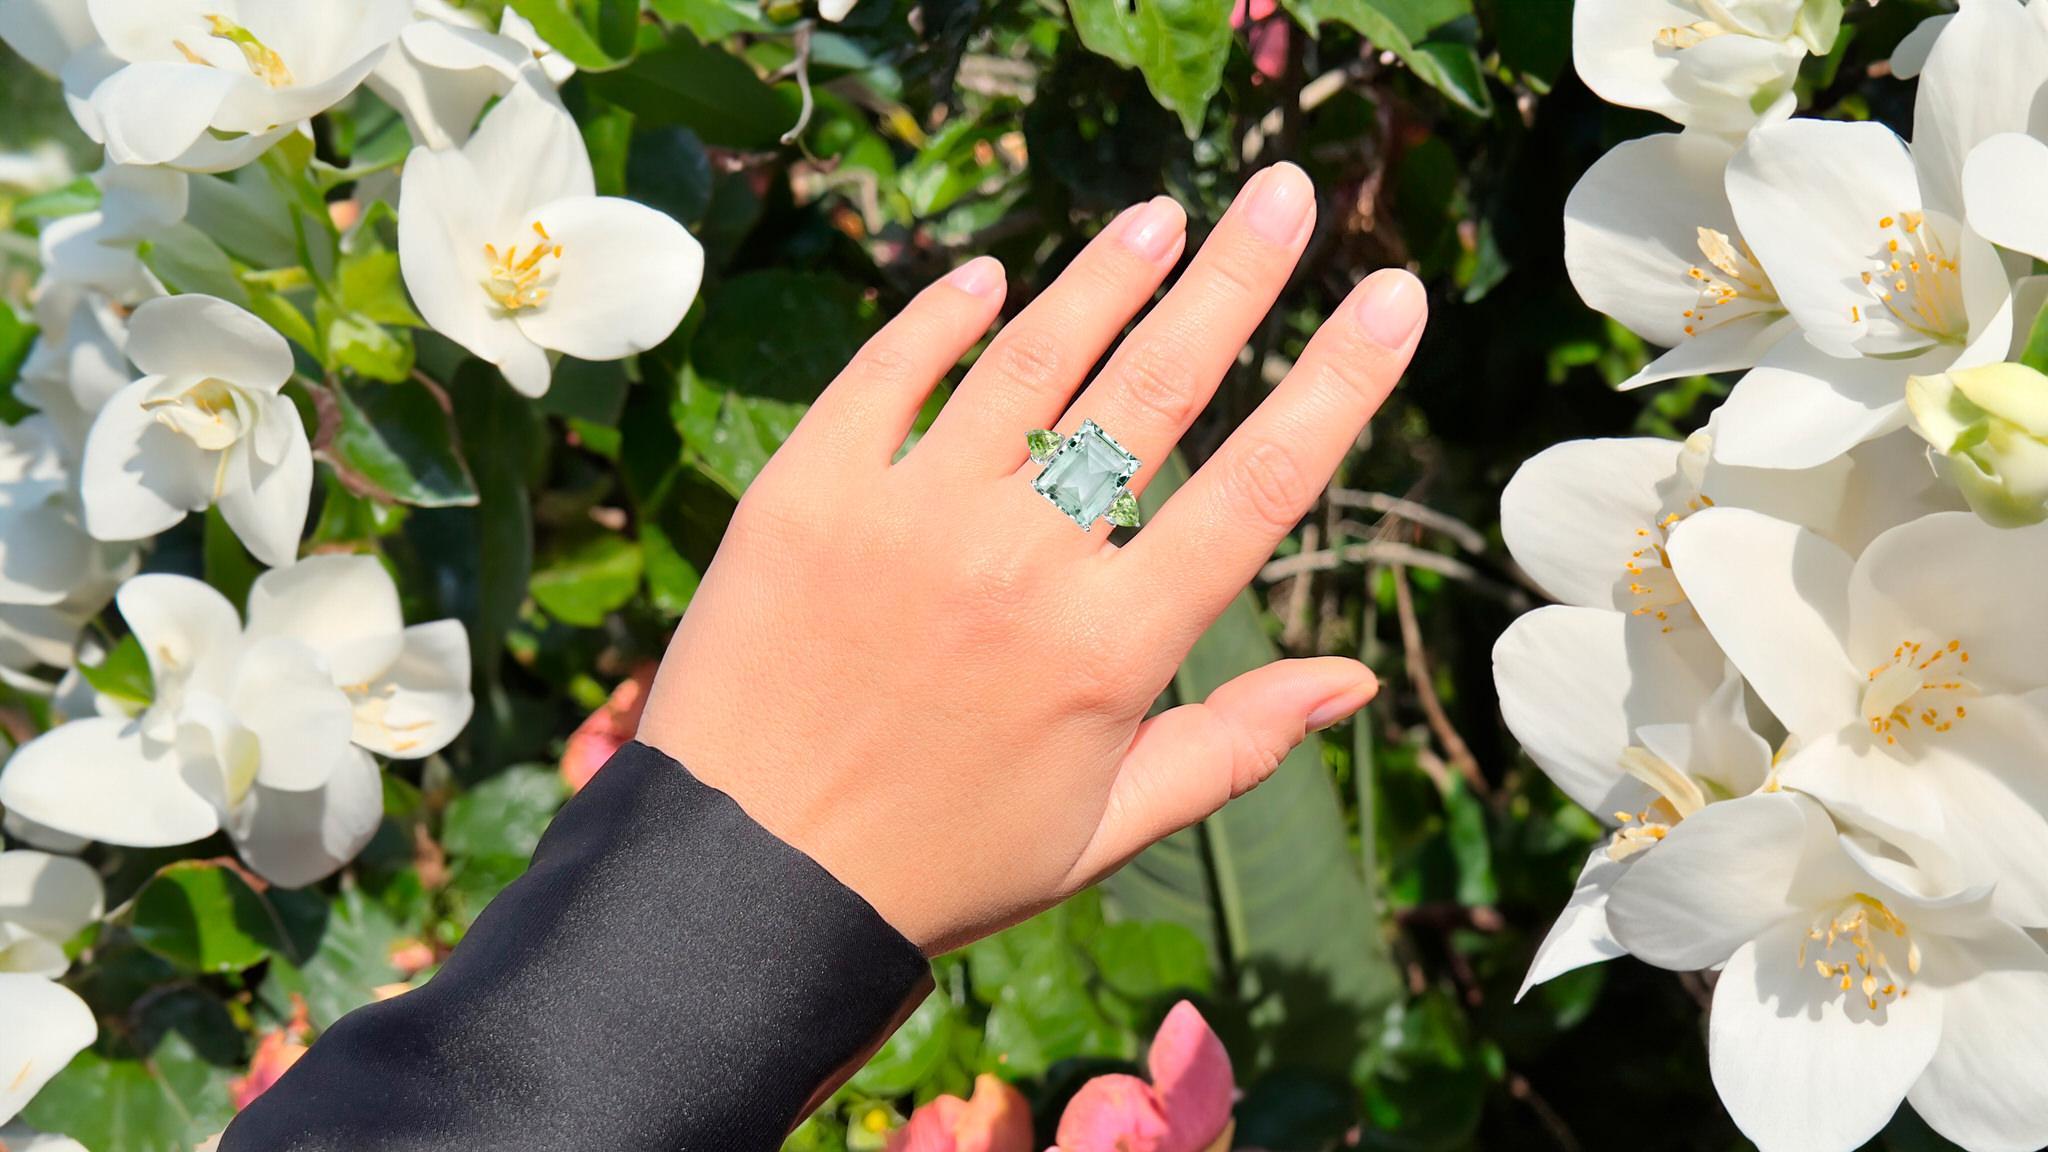 It comes with the Gemological Appraisal by GIA GG/AJP
All Gemstones are Natural
Green Amethyst = 10.50 Carats
2 Peridots = 1.50 Carats
Metal: Rhodium Plated Sterling Silver
Ring Size: 7* US
*It can be resized complimentary